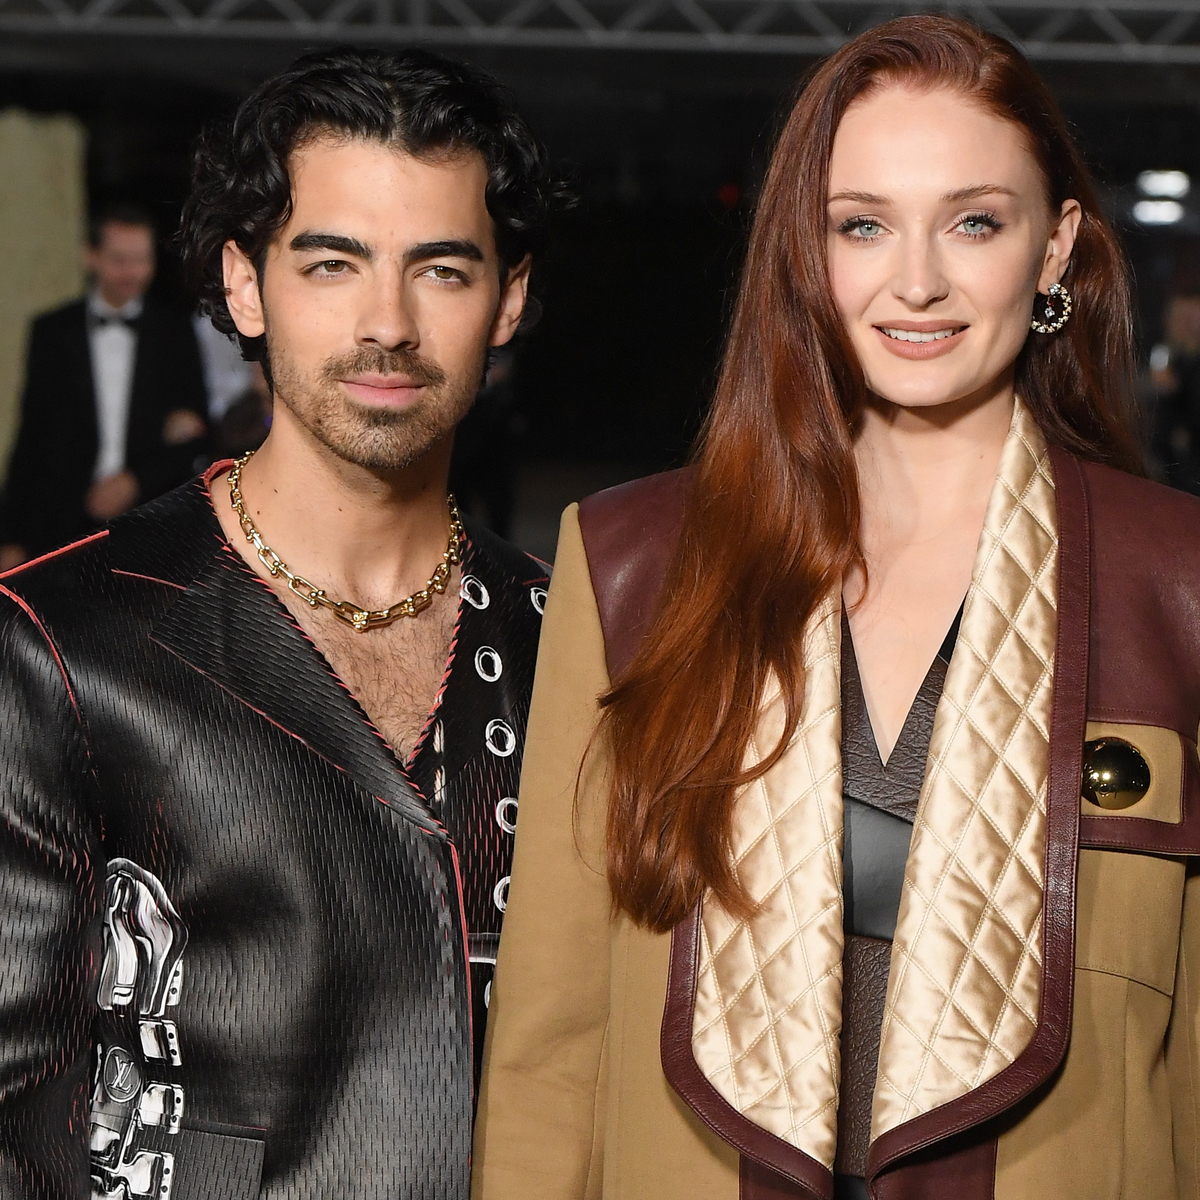 Sophie Turner and Joe Jonas’ Youngest Daughter’s Name Revealed